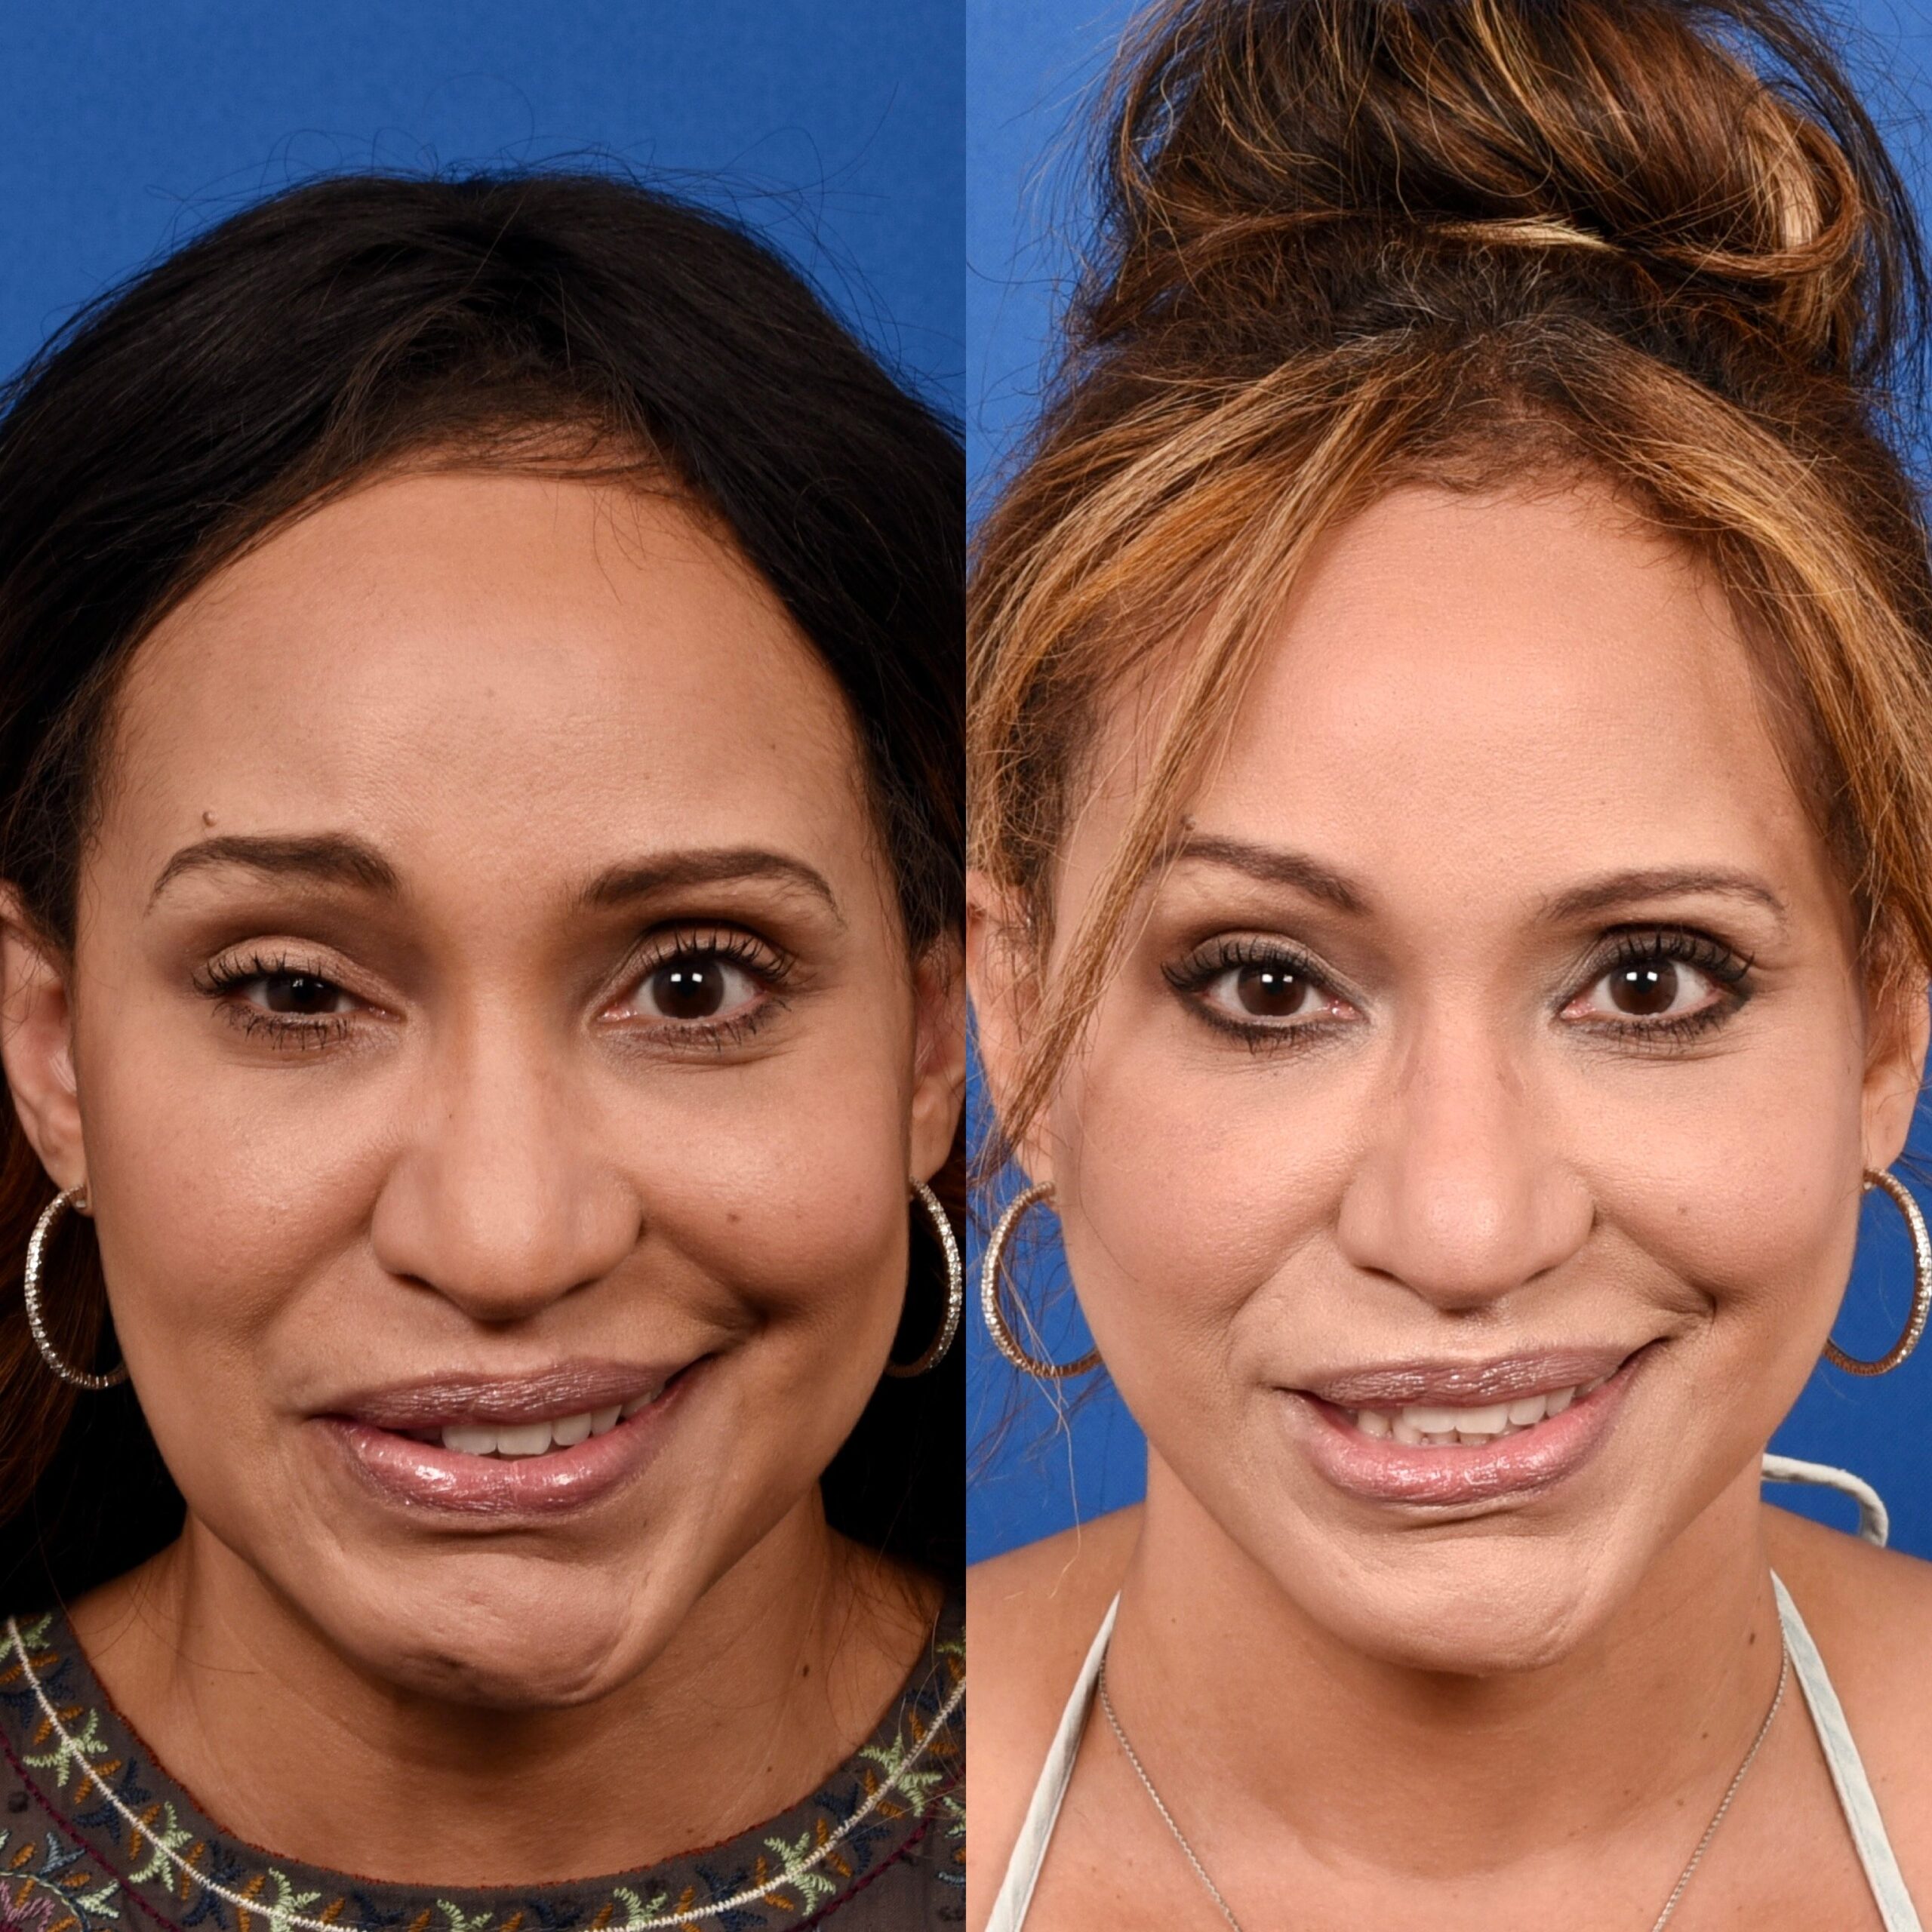 A woman after facial paralysis surgery before and after pictures. Smile reanimation transformation pictures.